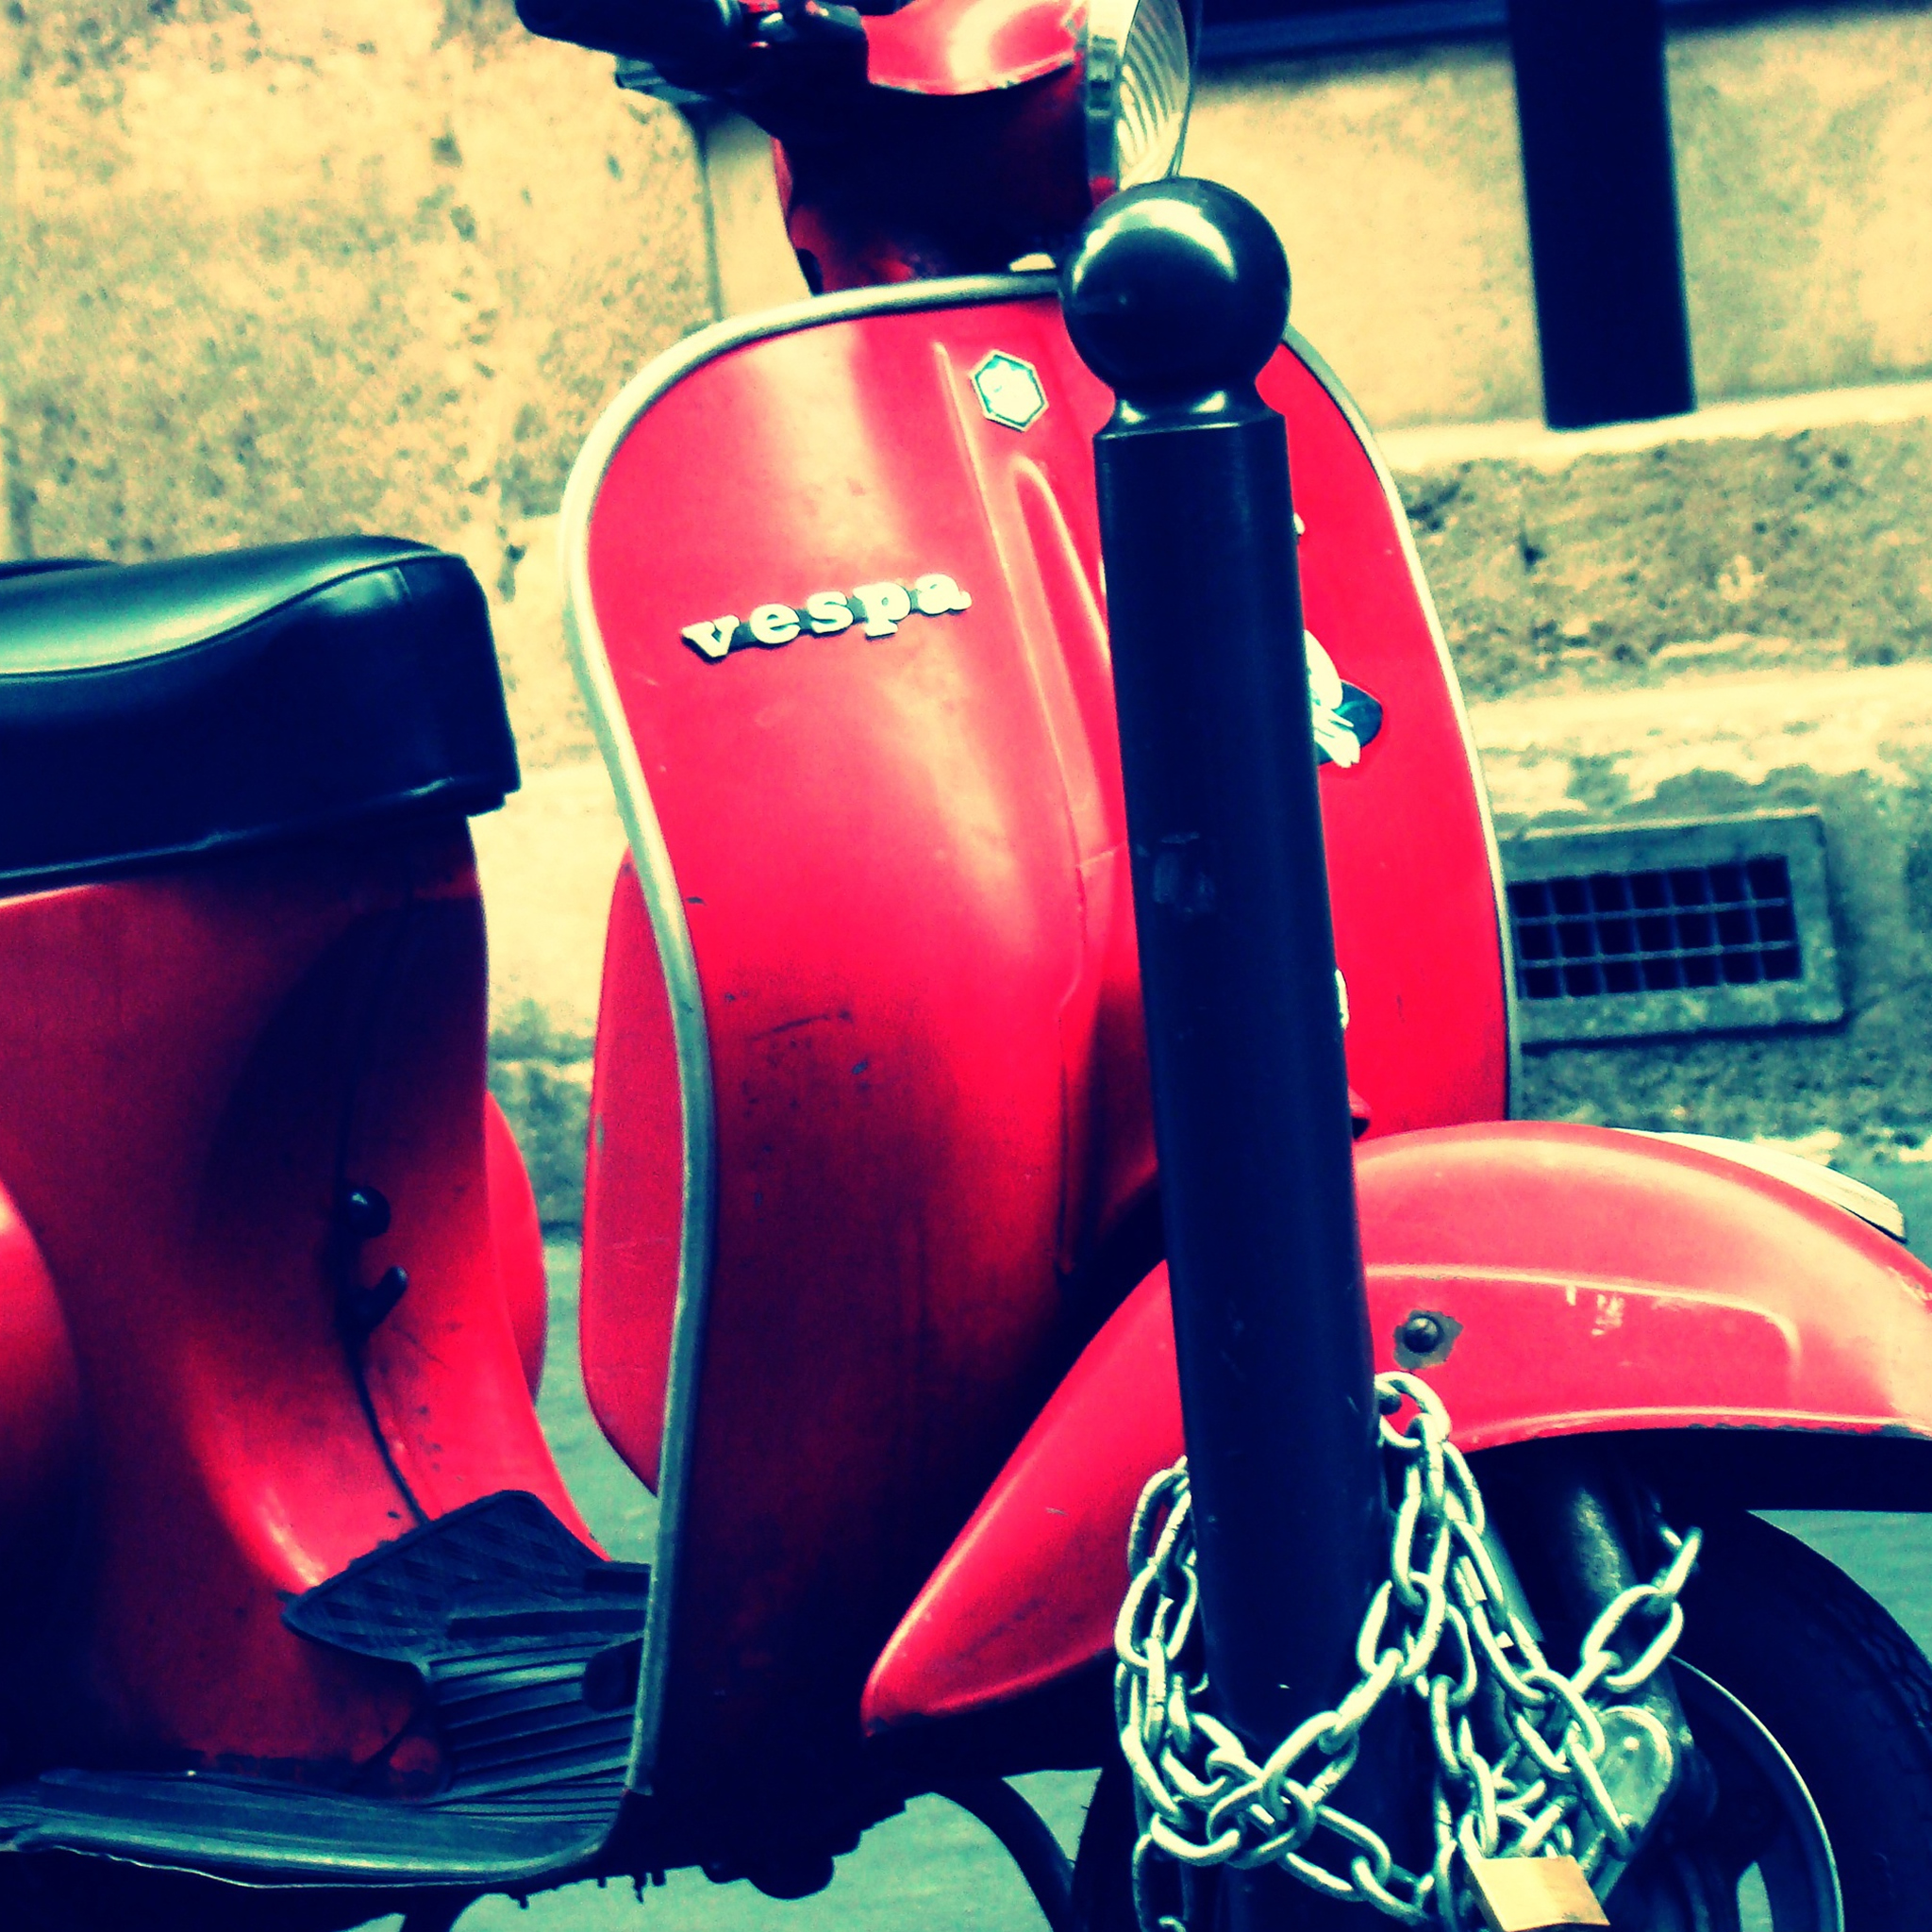 Scooter Cover Pictures For Facebook - HD Wallpaper 